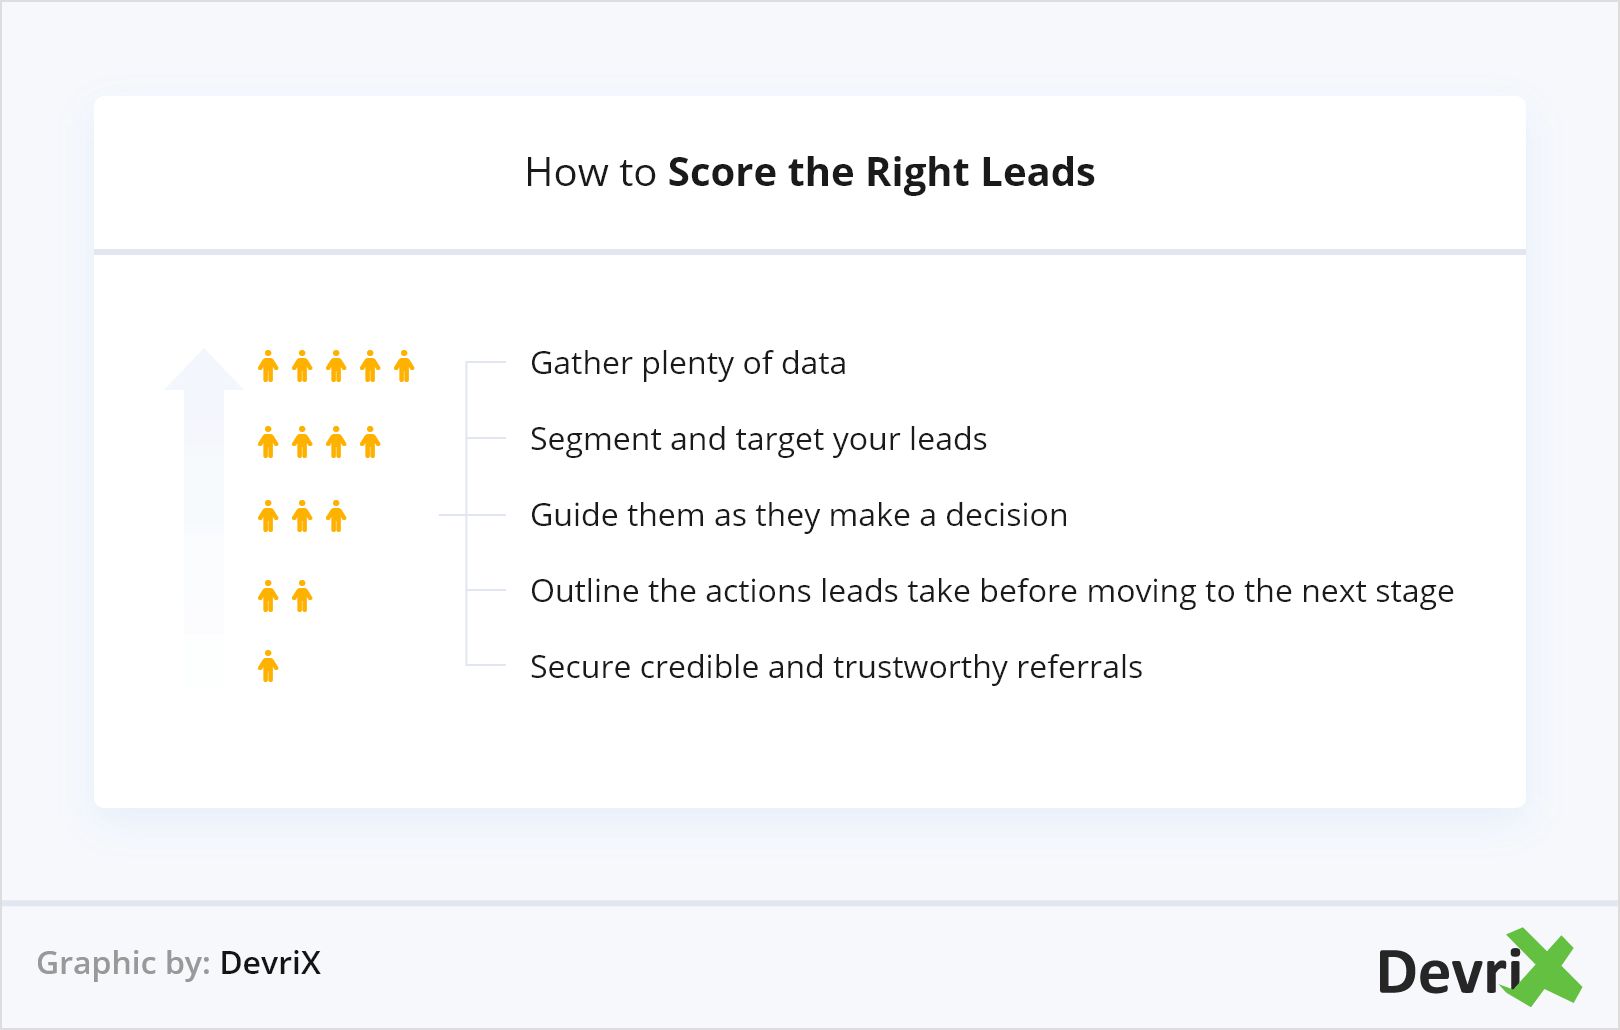 How to Score the Right Leads